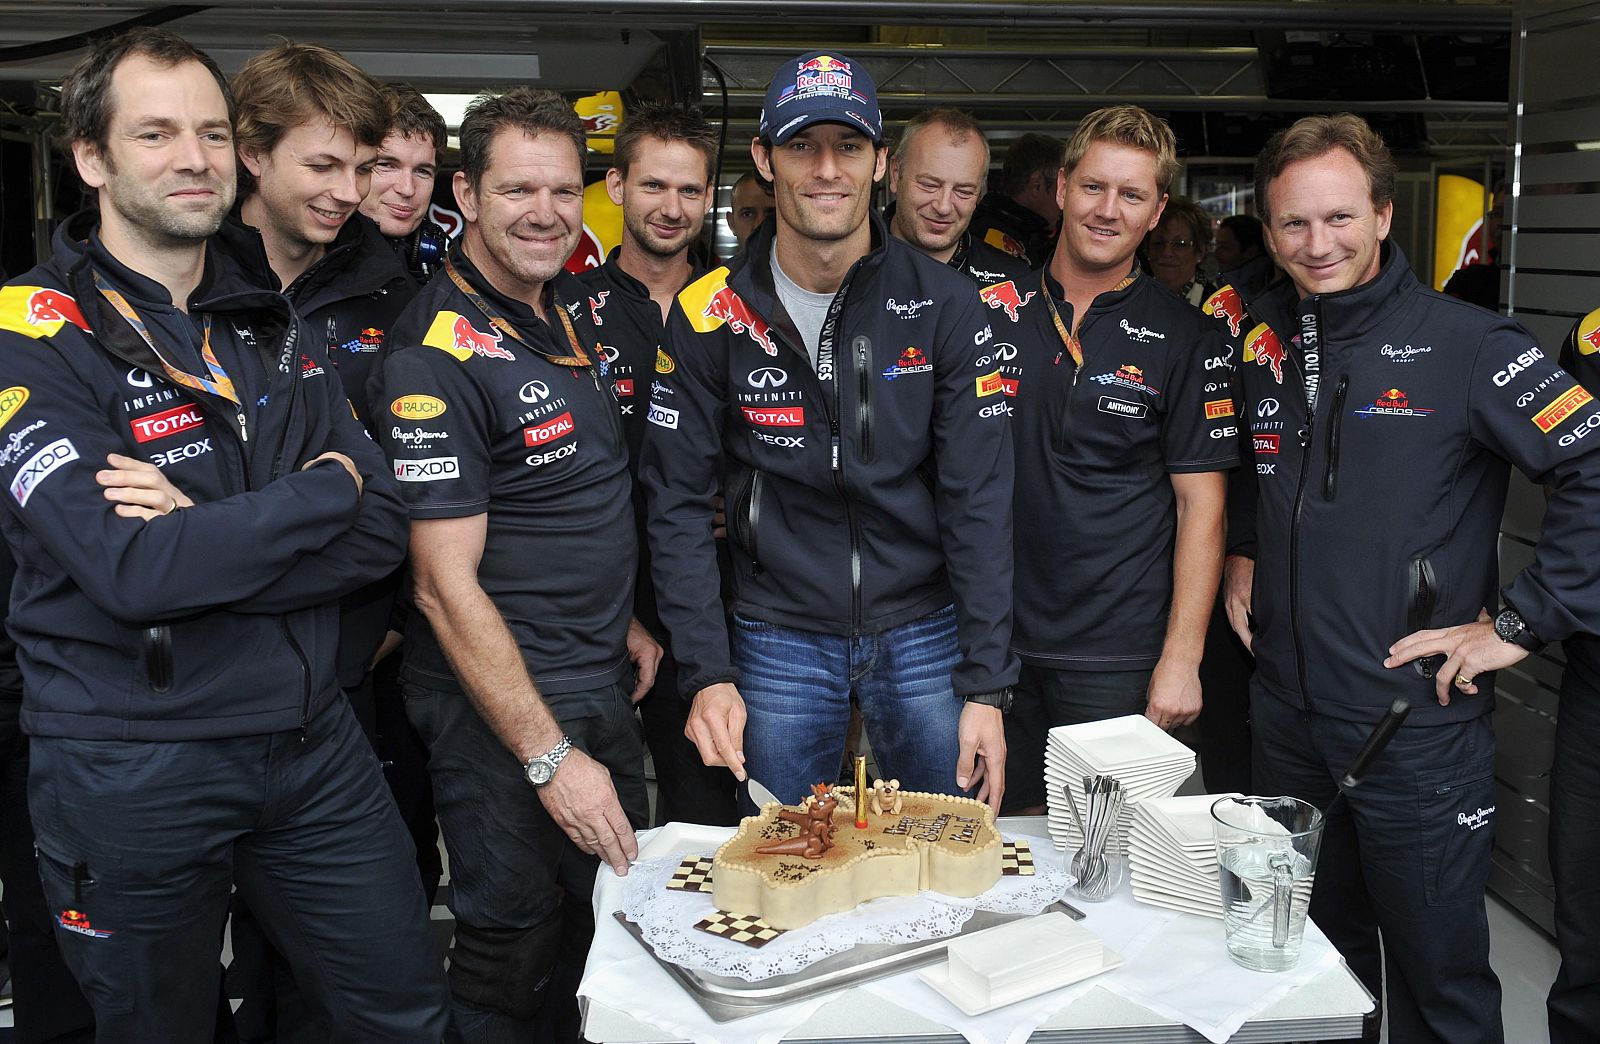 Red Bull Formula One driver Webber of Australia celebrates his 35th birthday before the third practice session of the Belgian F1 Grand Prix in Spa-Francorchamps